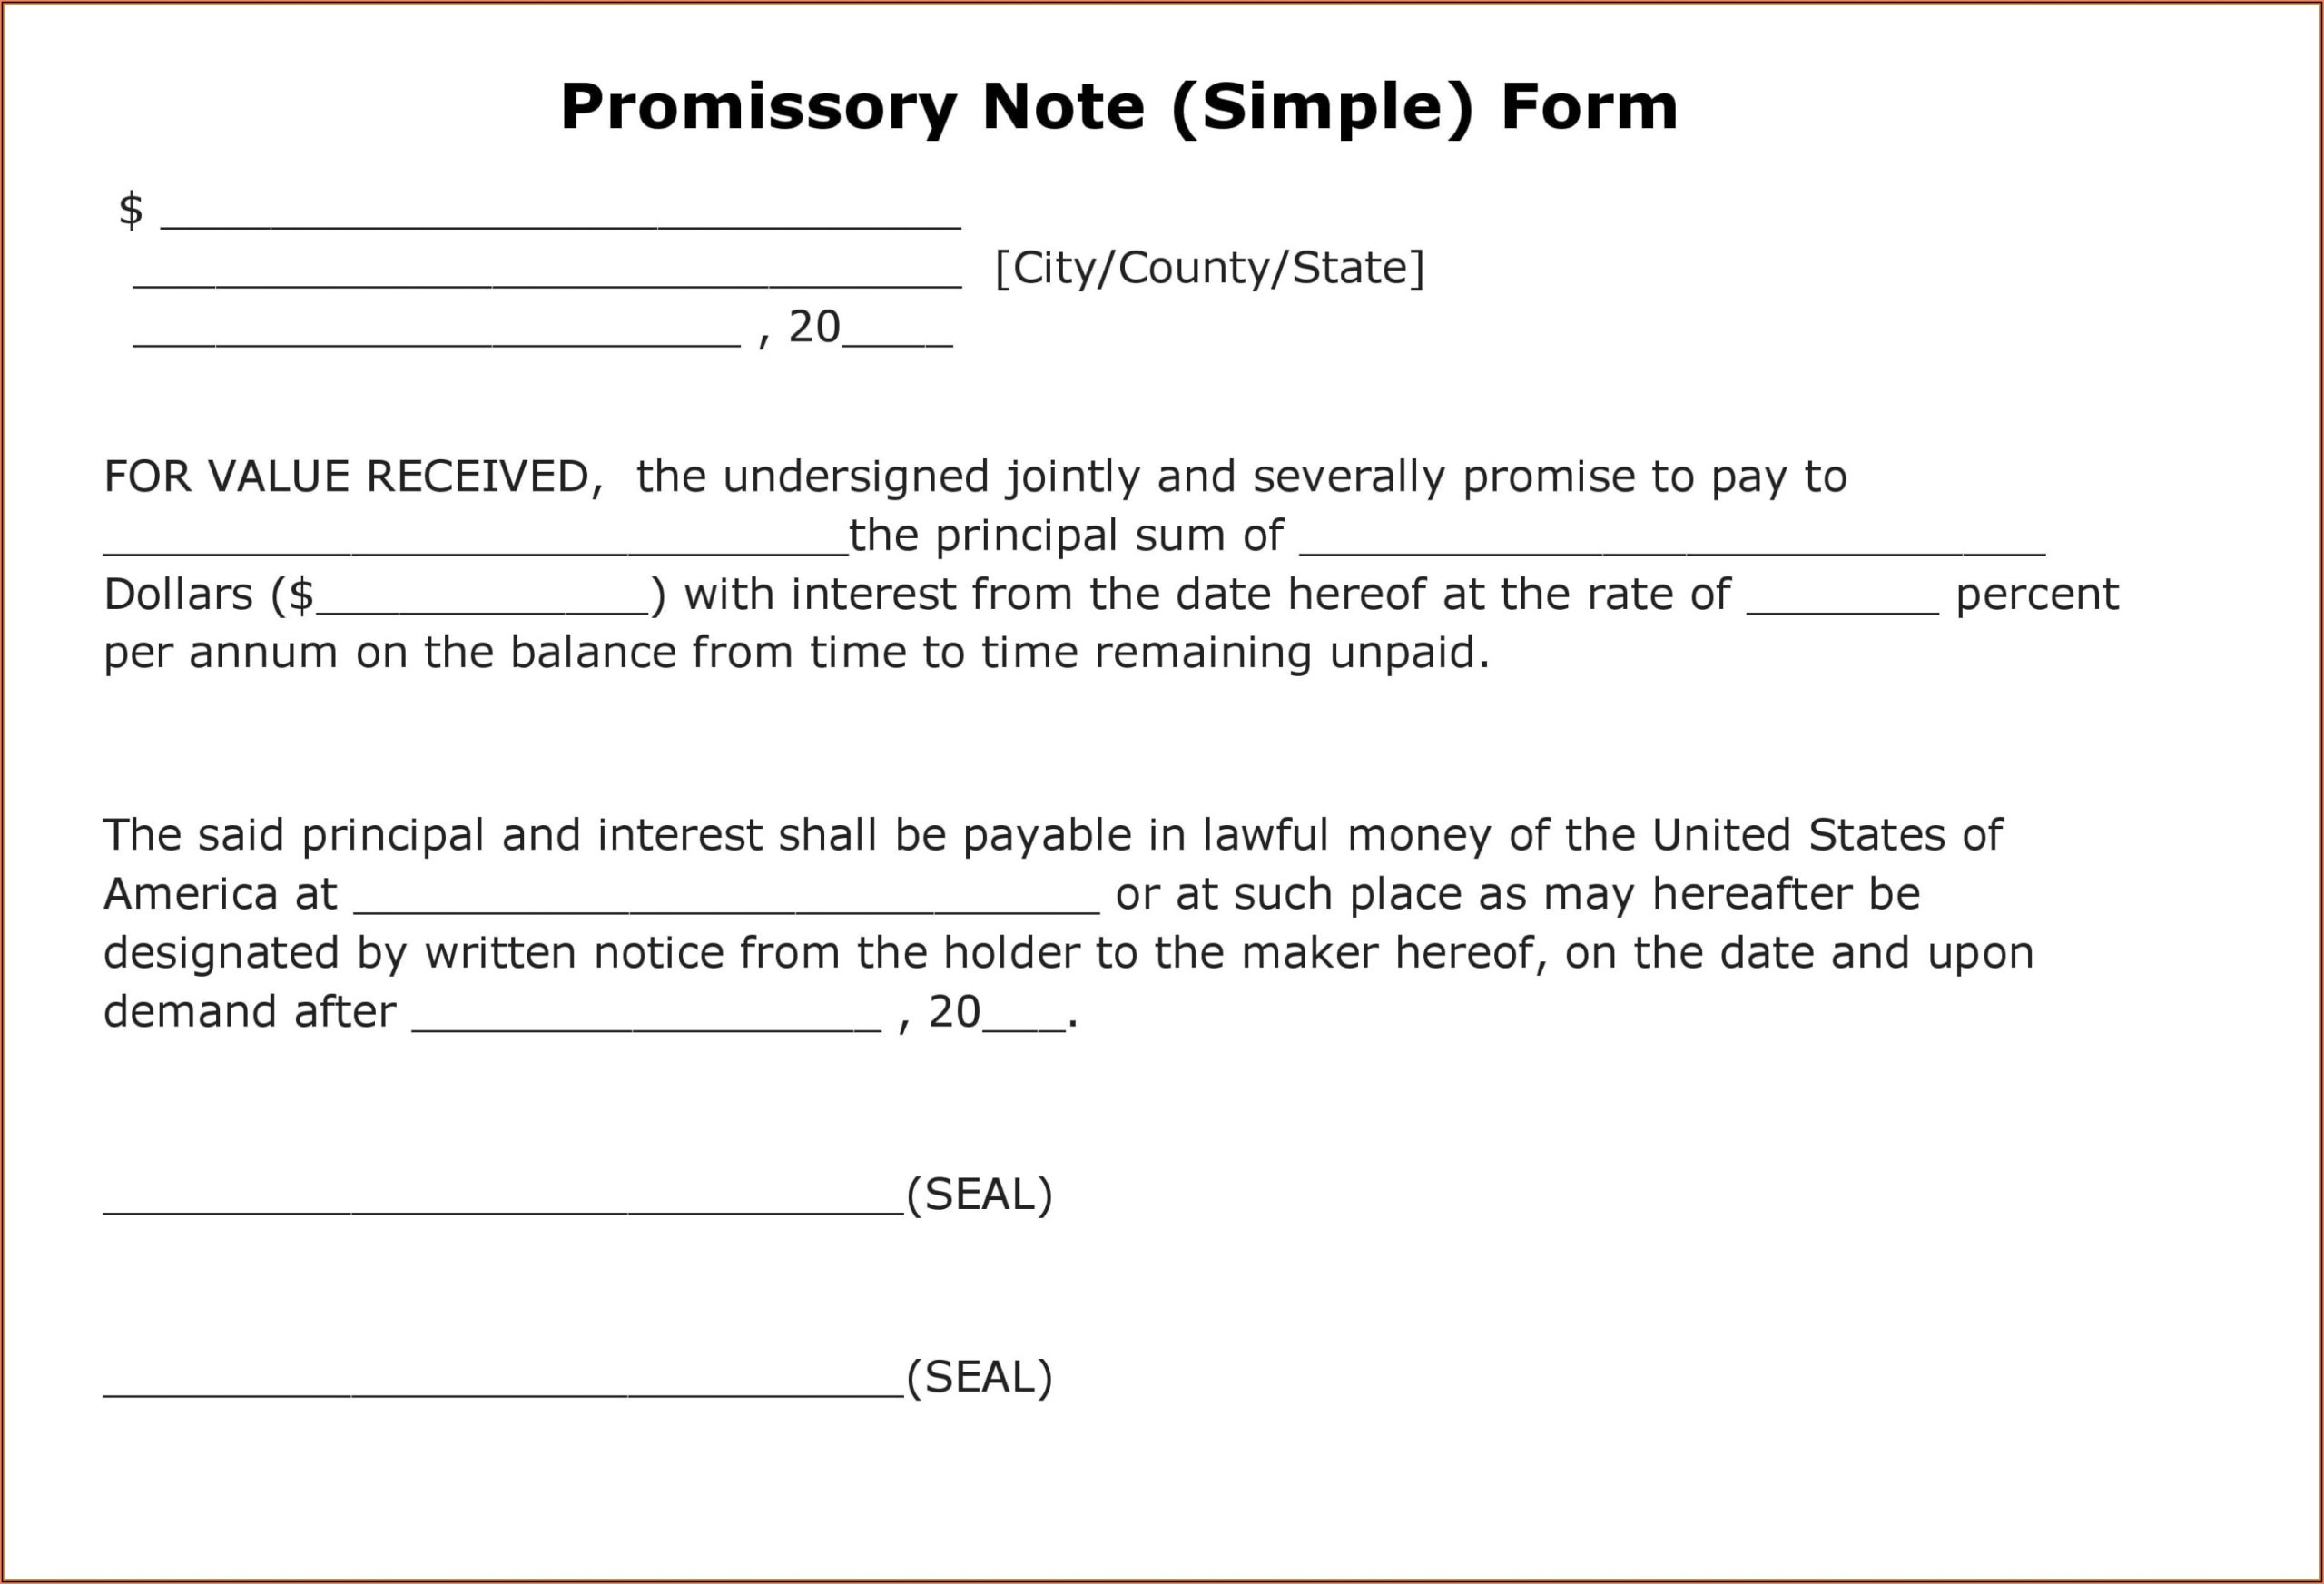 The Real Estate Commission Approved Earnest Money Promissory Note Form Throughout Promissory Note Real Estate Template